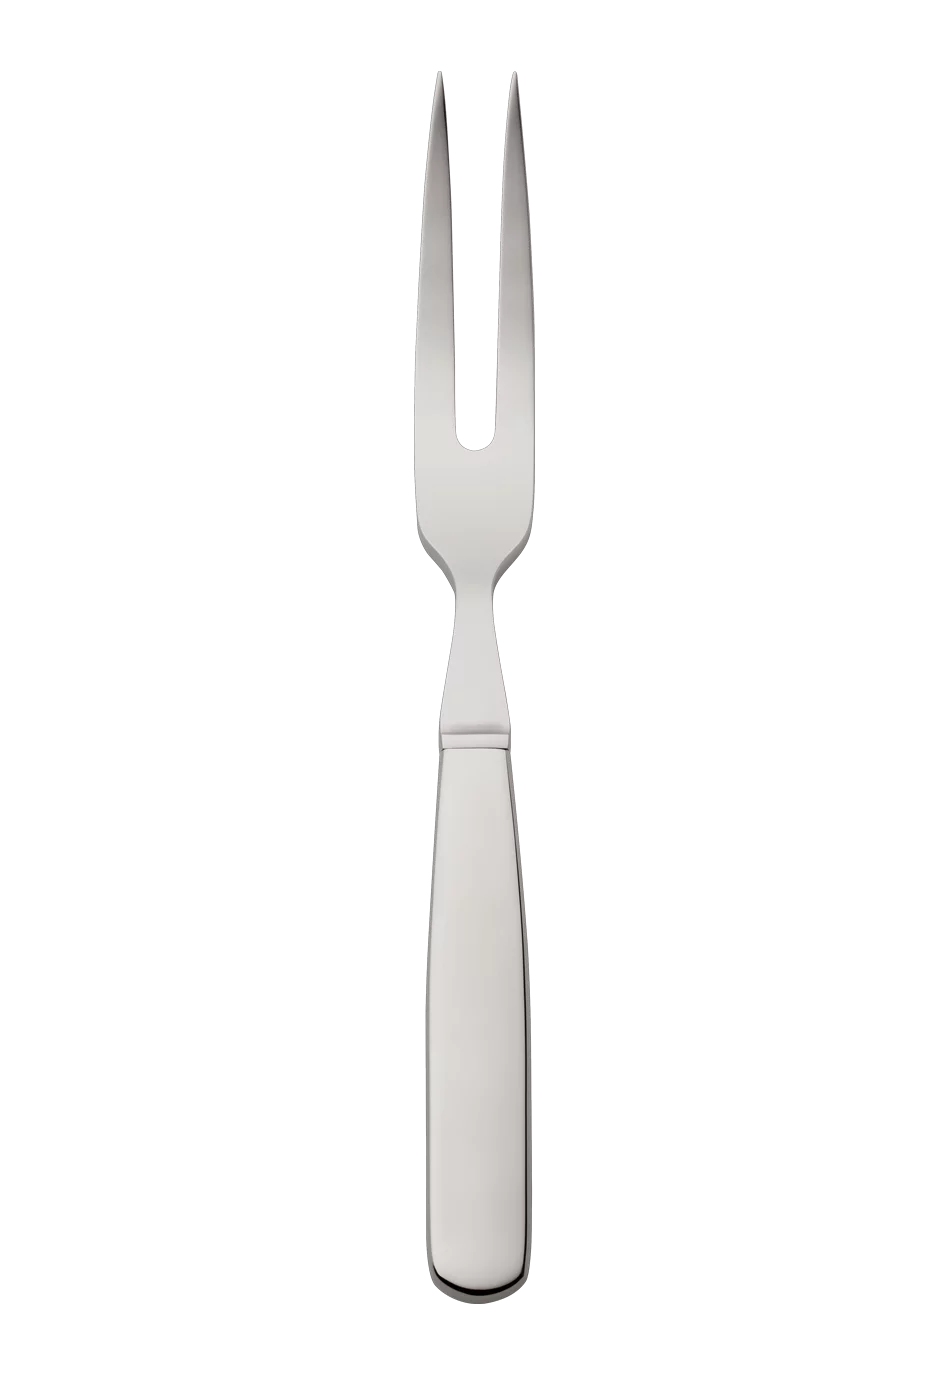 Topos Carving Fork (18/8 stainless steel)